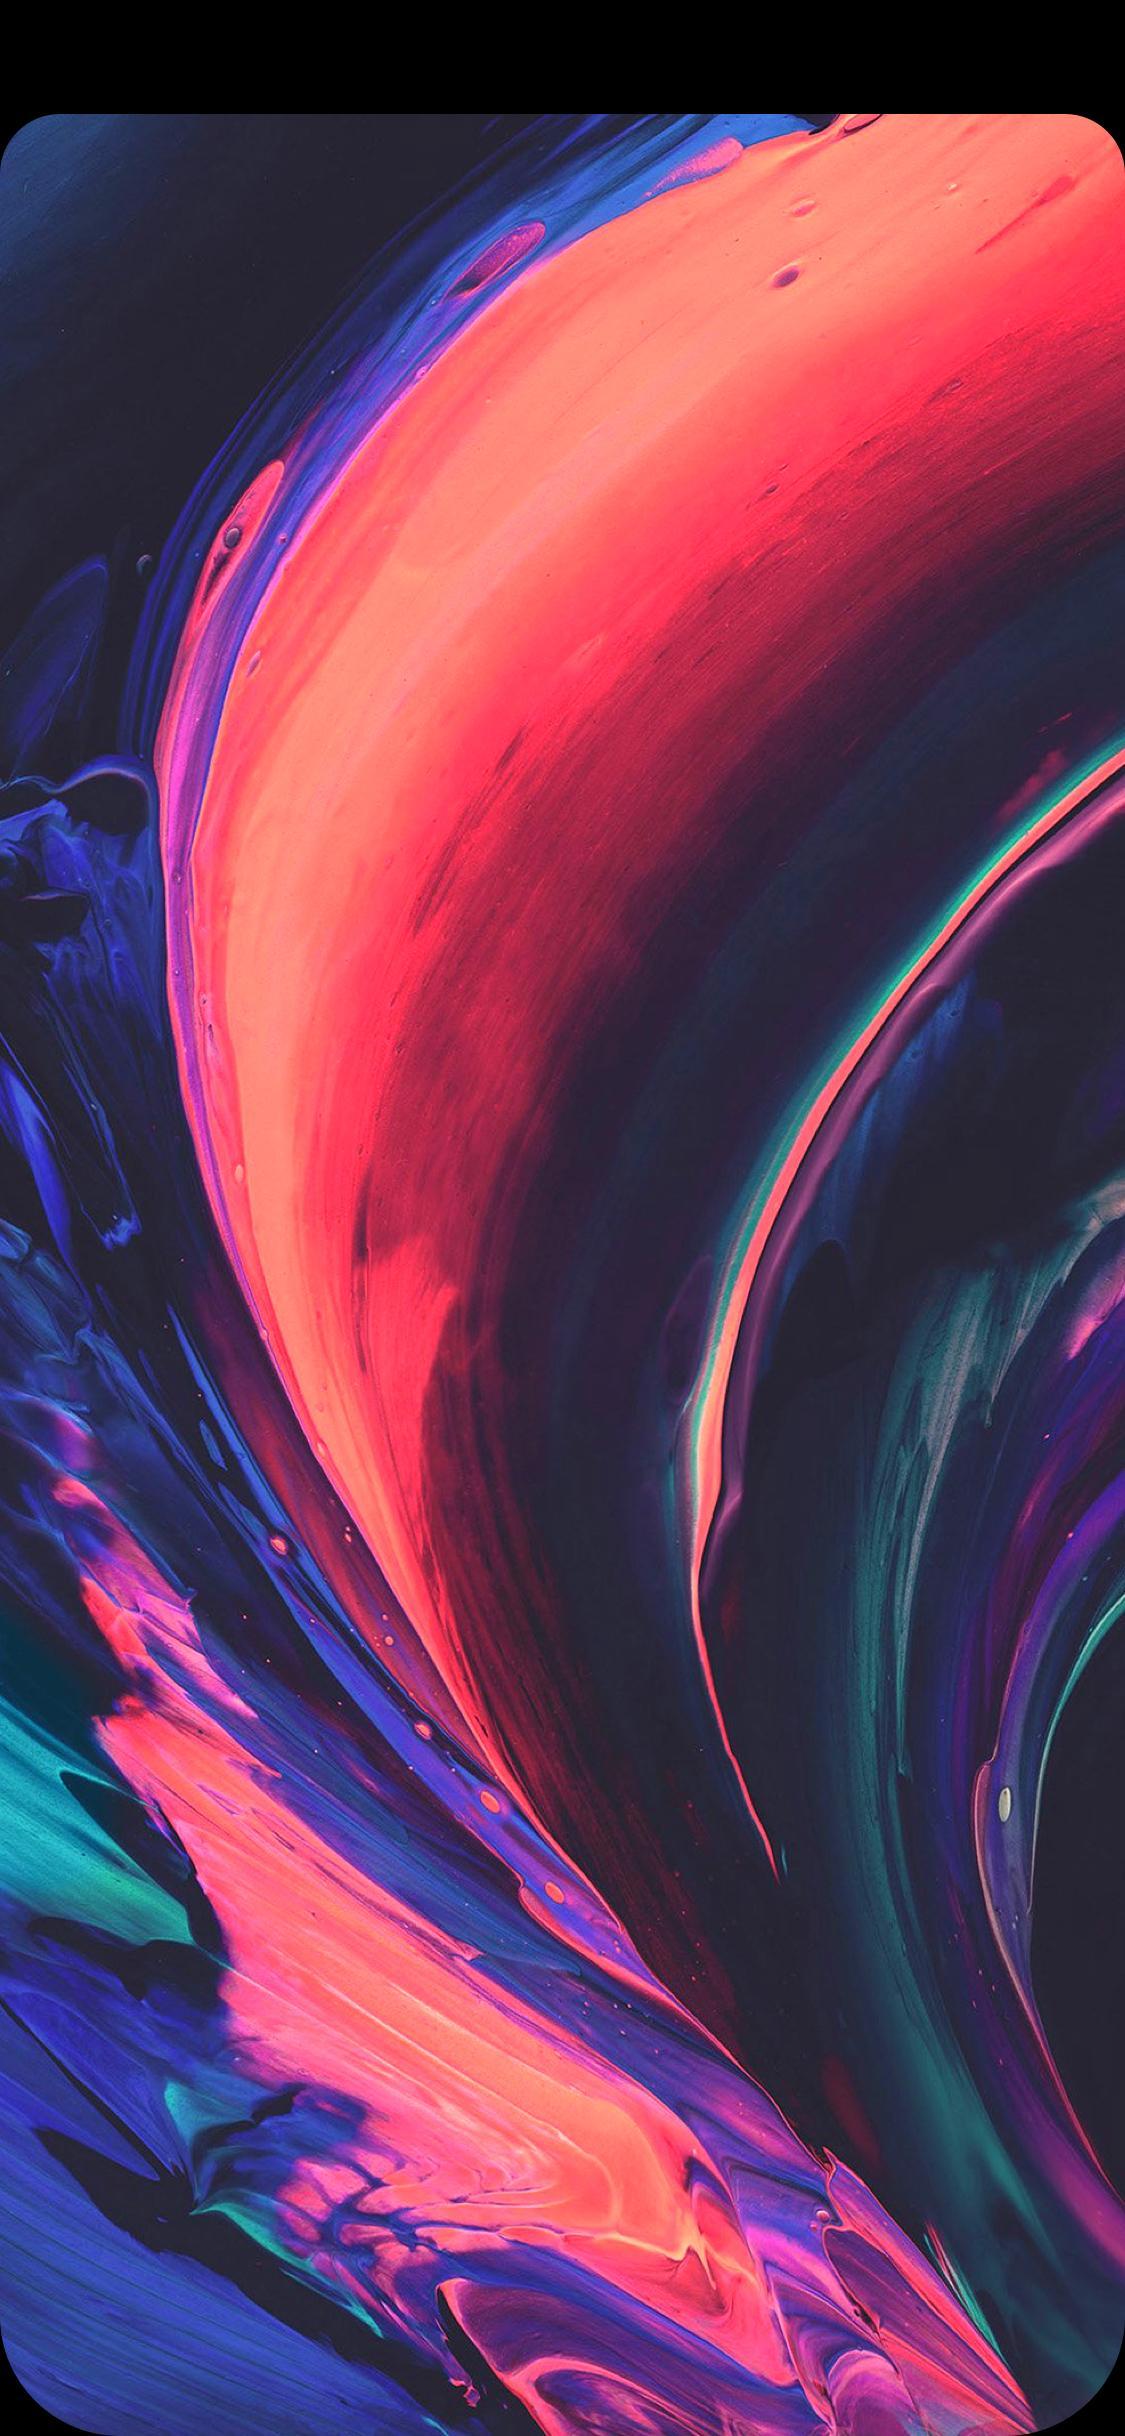 Notch Less Wallpaper Perfect For Your IPhone X